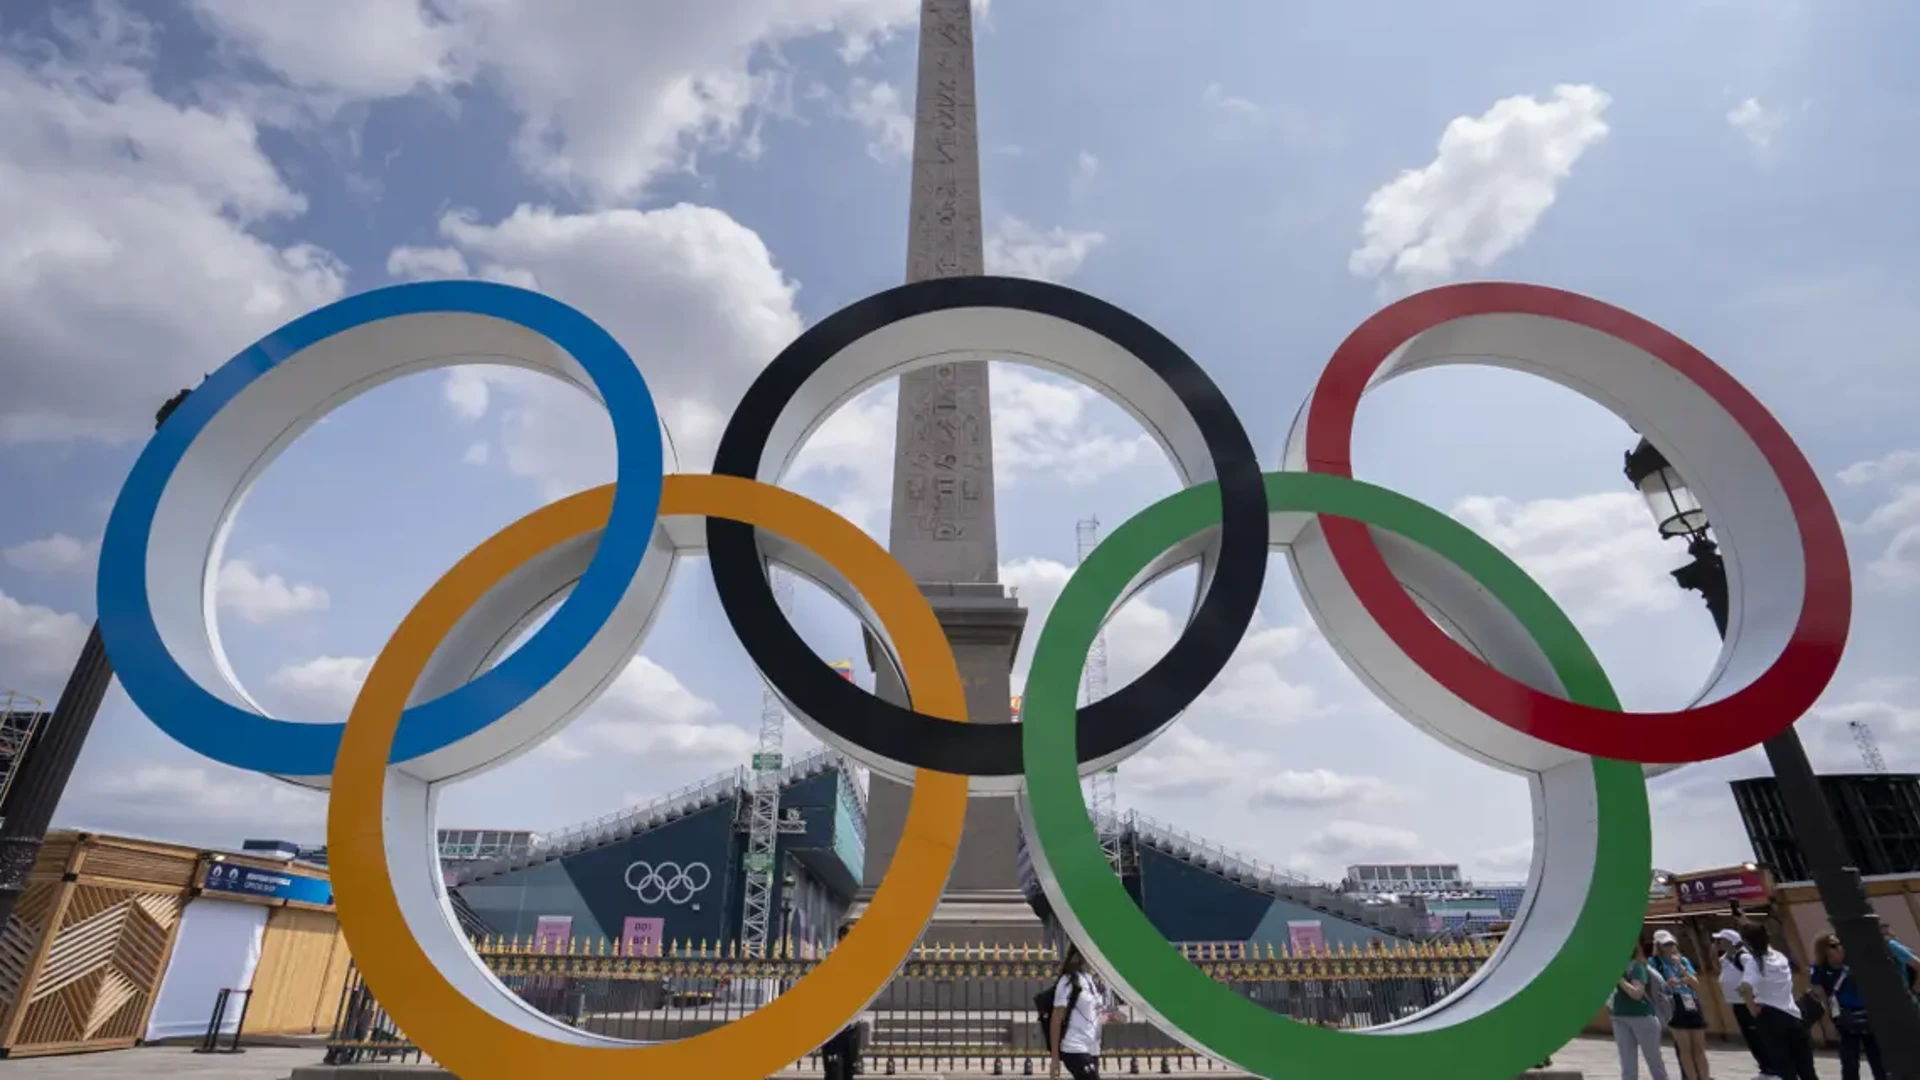 ANTICIPATION: What we know about the Paris Olympics opening ceremony